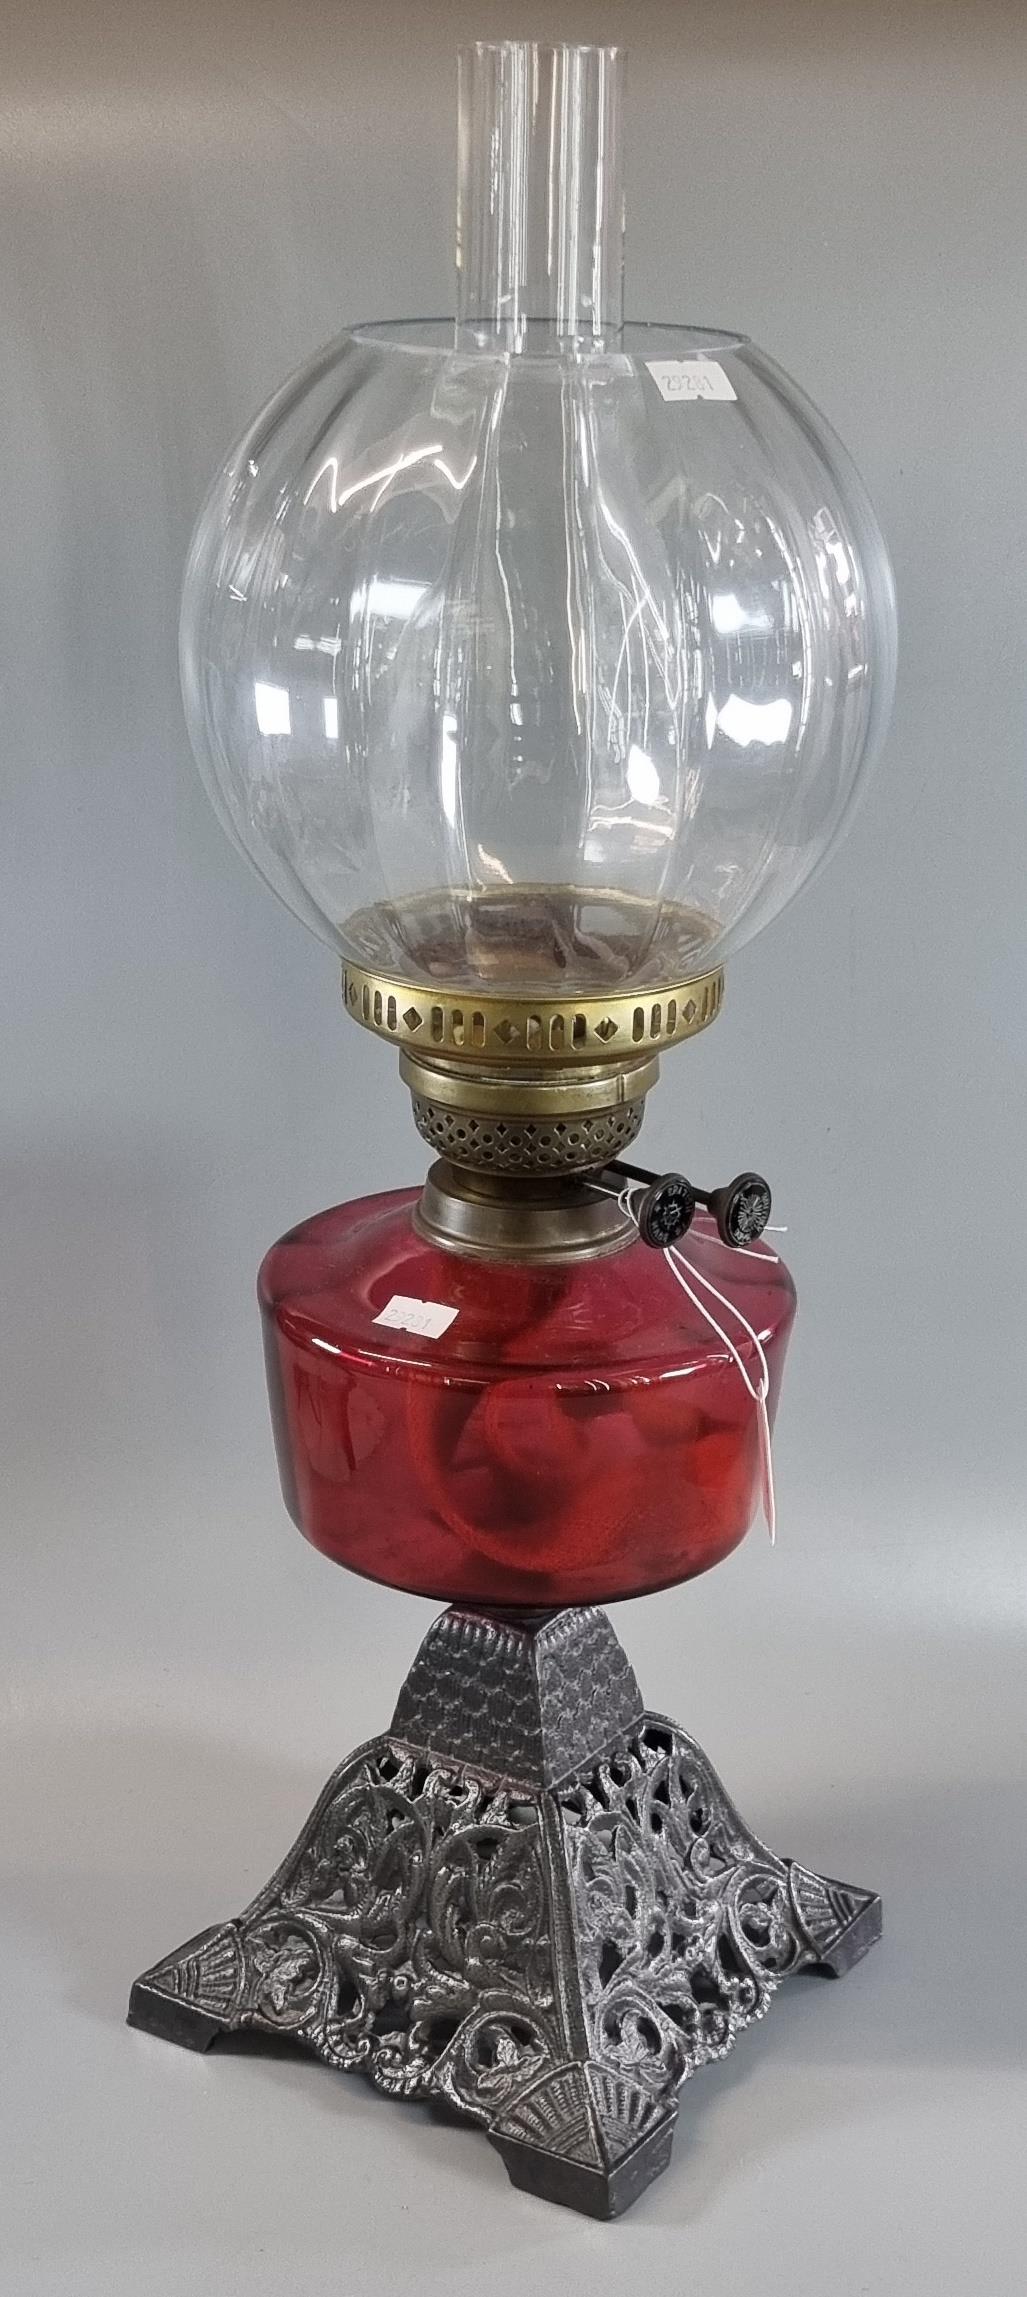 Early 20th century double oil burner lamp having glass globular shade above a cranberry glass